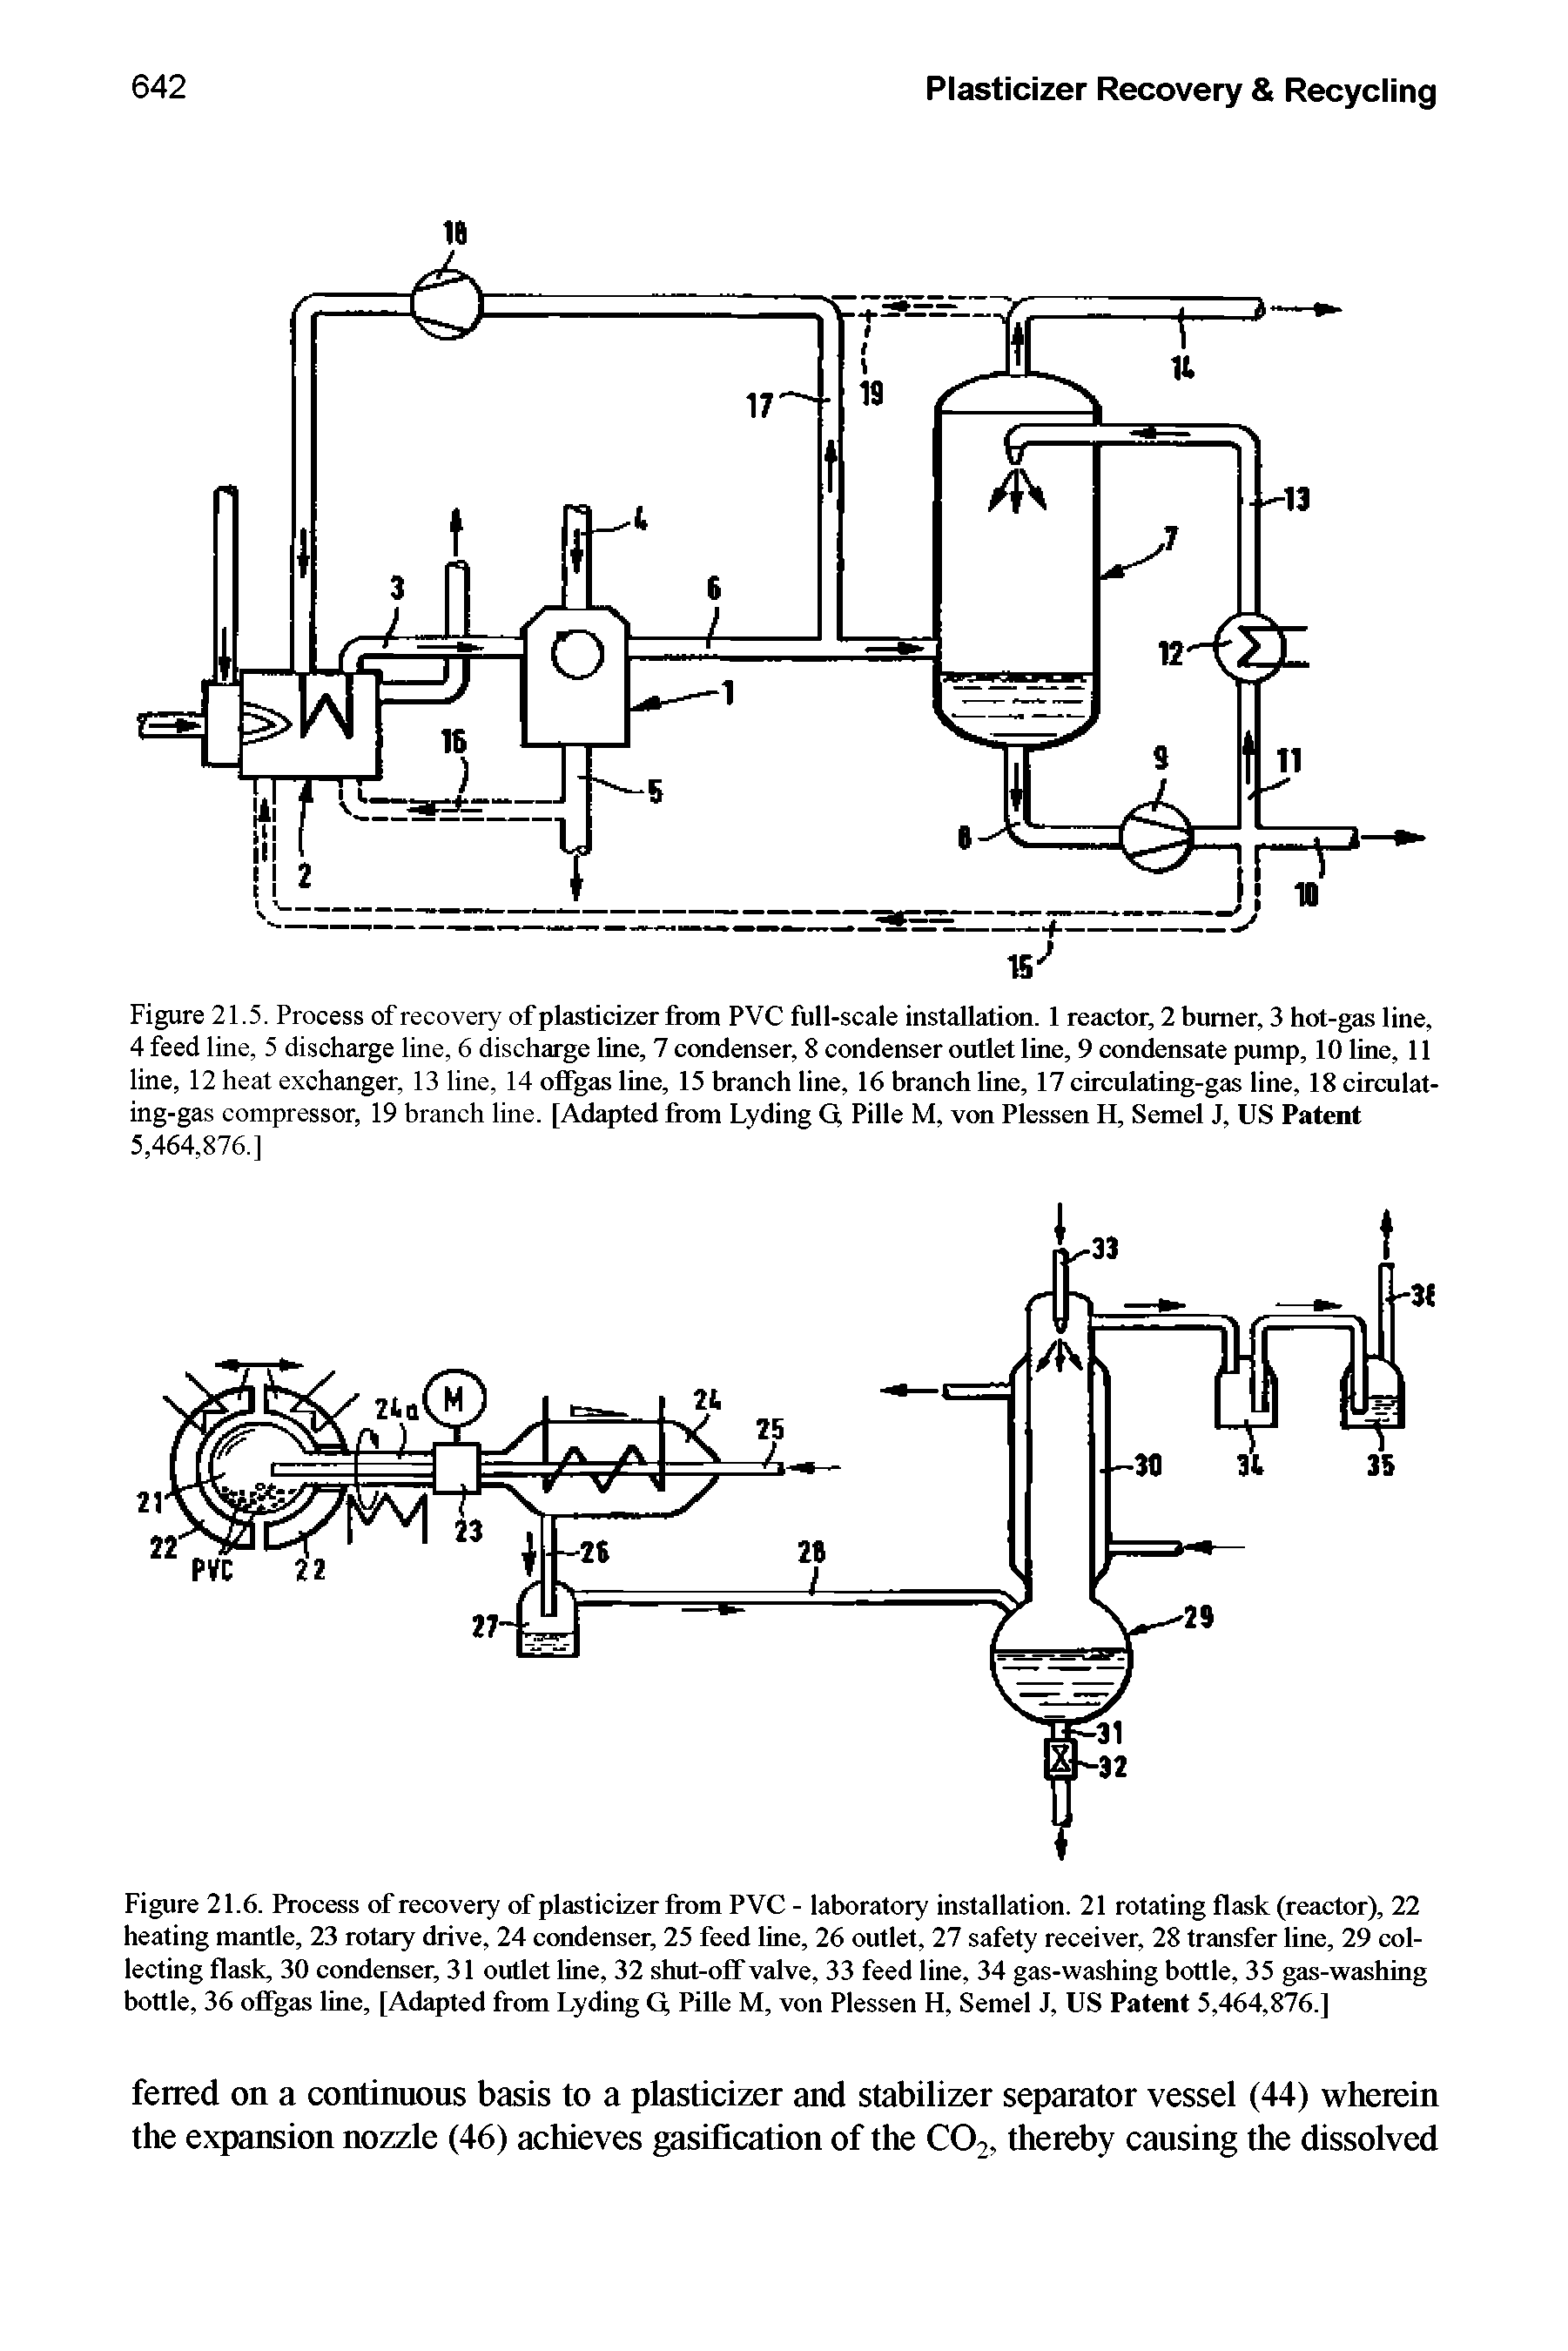 Figure 21.6. Process of recovery of plasticizer from PVC - laboratory installation. 21 rotating flask (reactor), 22 heating mantle, 23 rotary drive, 24 condenser, 25 feed line, 26 outlet, 27 safety receiver, 28 transfer line, 29 collecting flask, 30 condenser, 31 outlet line, 32 shut-off valve, 33 feed line, 34 gas-washing bottle, 35 gas-washing bottle, 36 offgas line, [Adapted from Lyding Q Pille M, von Plessen H, Semel J, US Patent 5,464,876.]...